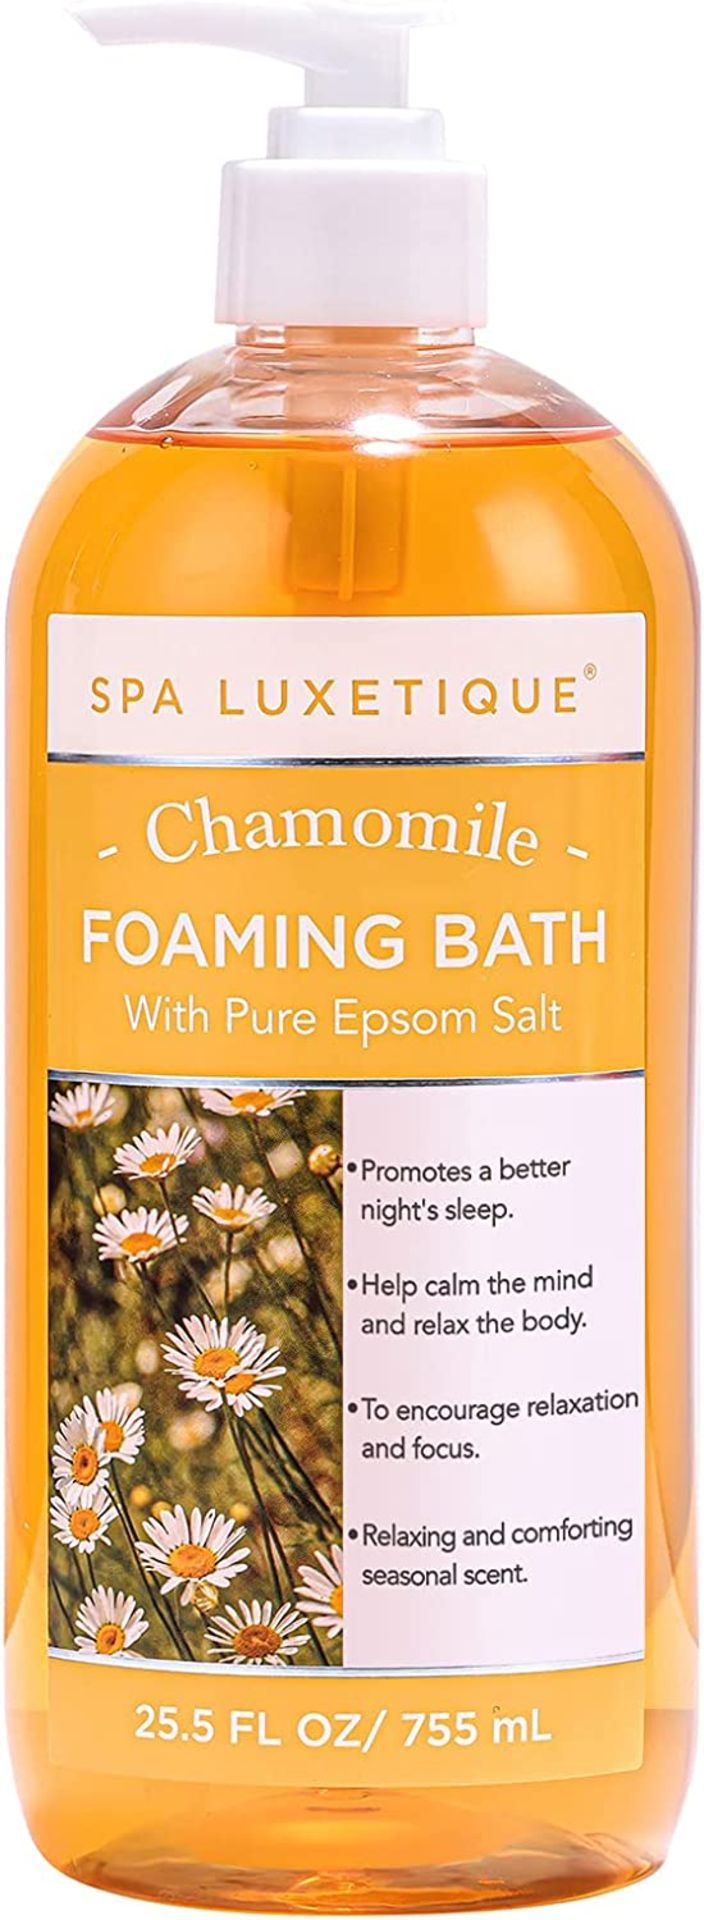 20 X NEW SEALED 755ml Chamomile Bubble Bath,Spa Luxetique Shower Gel Foaming Bath with Pure Epsom